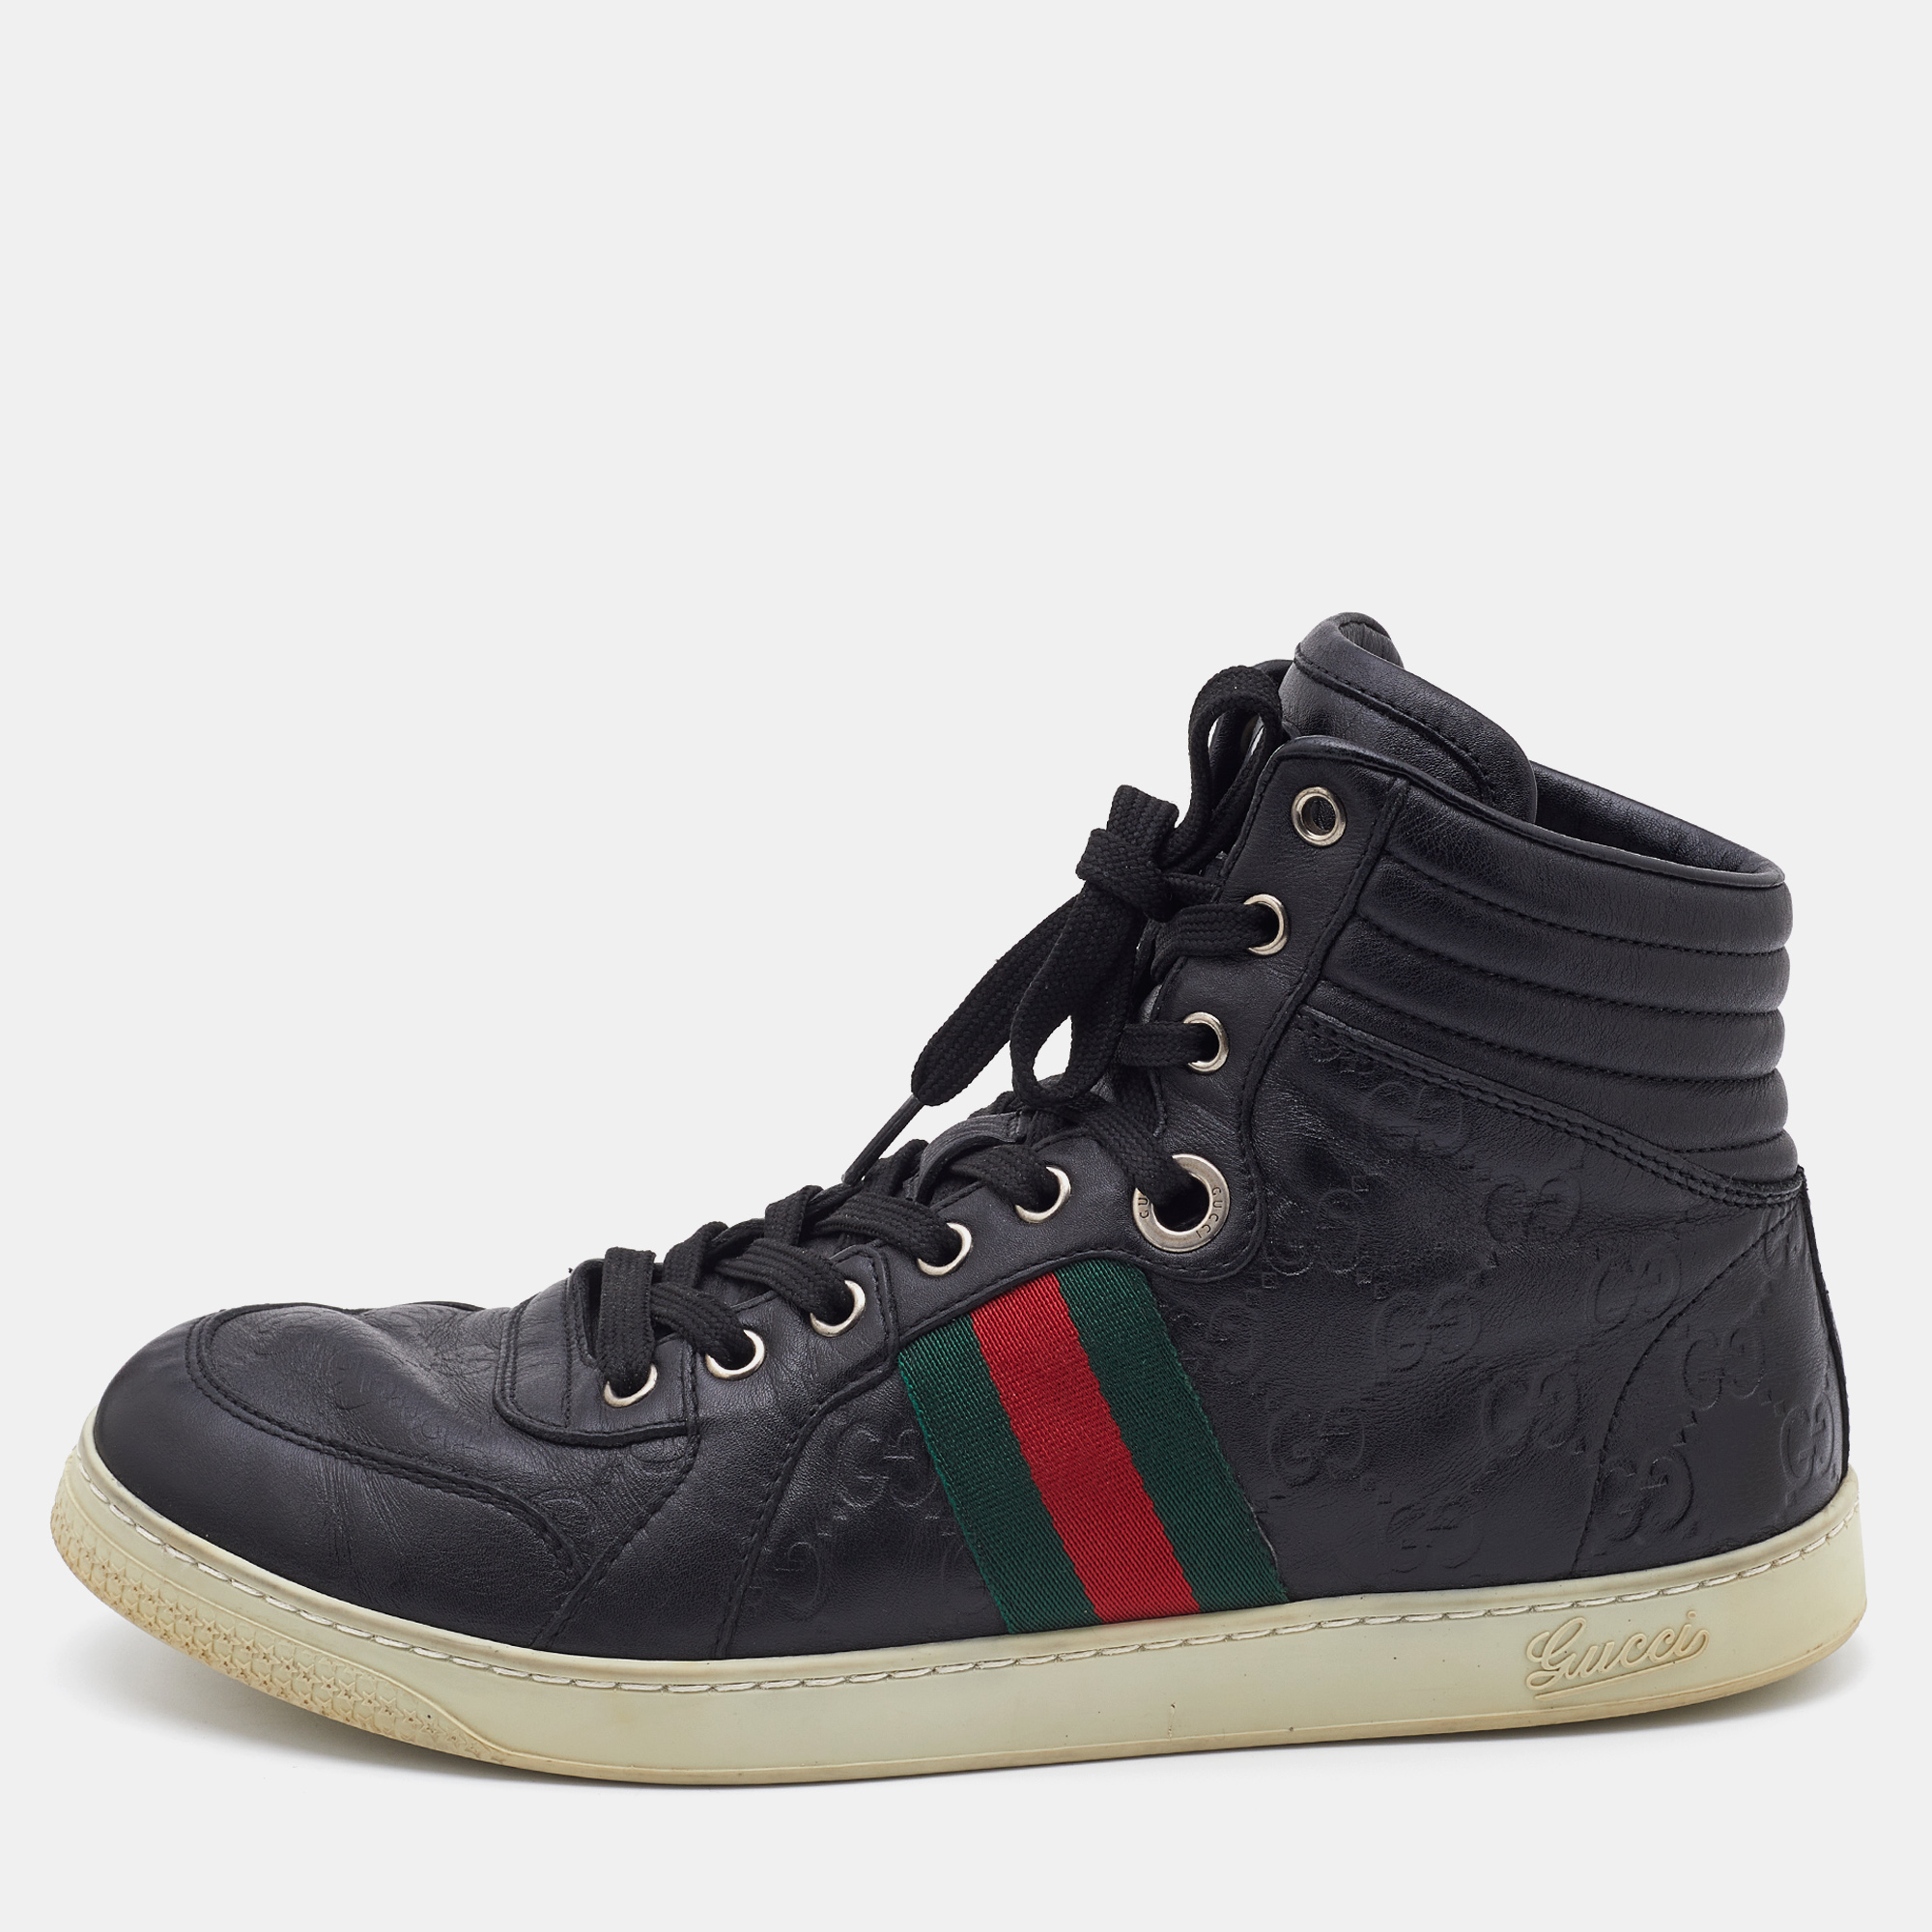 

Gucci Black Guccissima Leather Web Detail High Top Sneakers Size 41.5